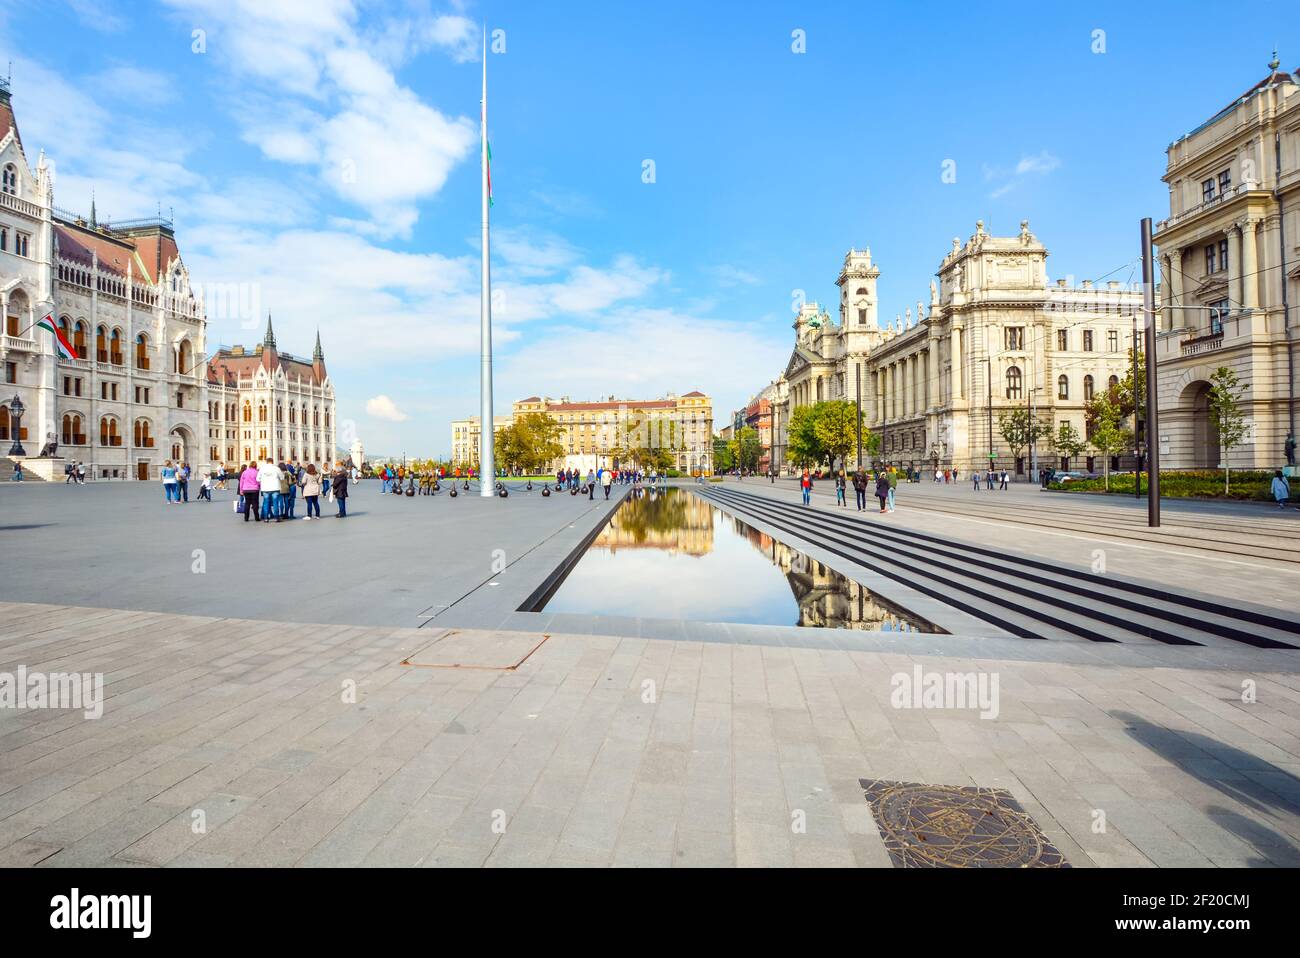 Parliament Square or Kossuth Lajos Ter in Budapest Hungary with tourists enjoying the Parliament Building and reflecting pool on a sunny day Stock Photo